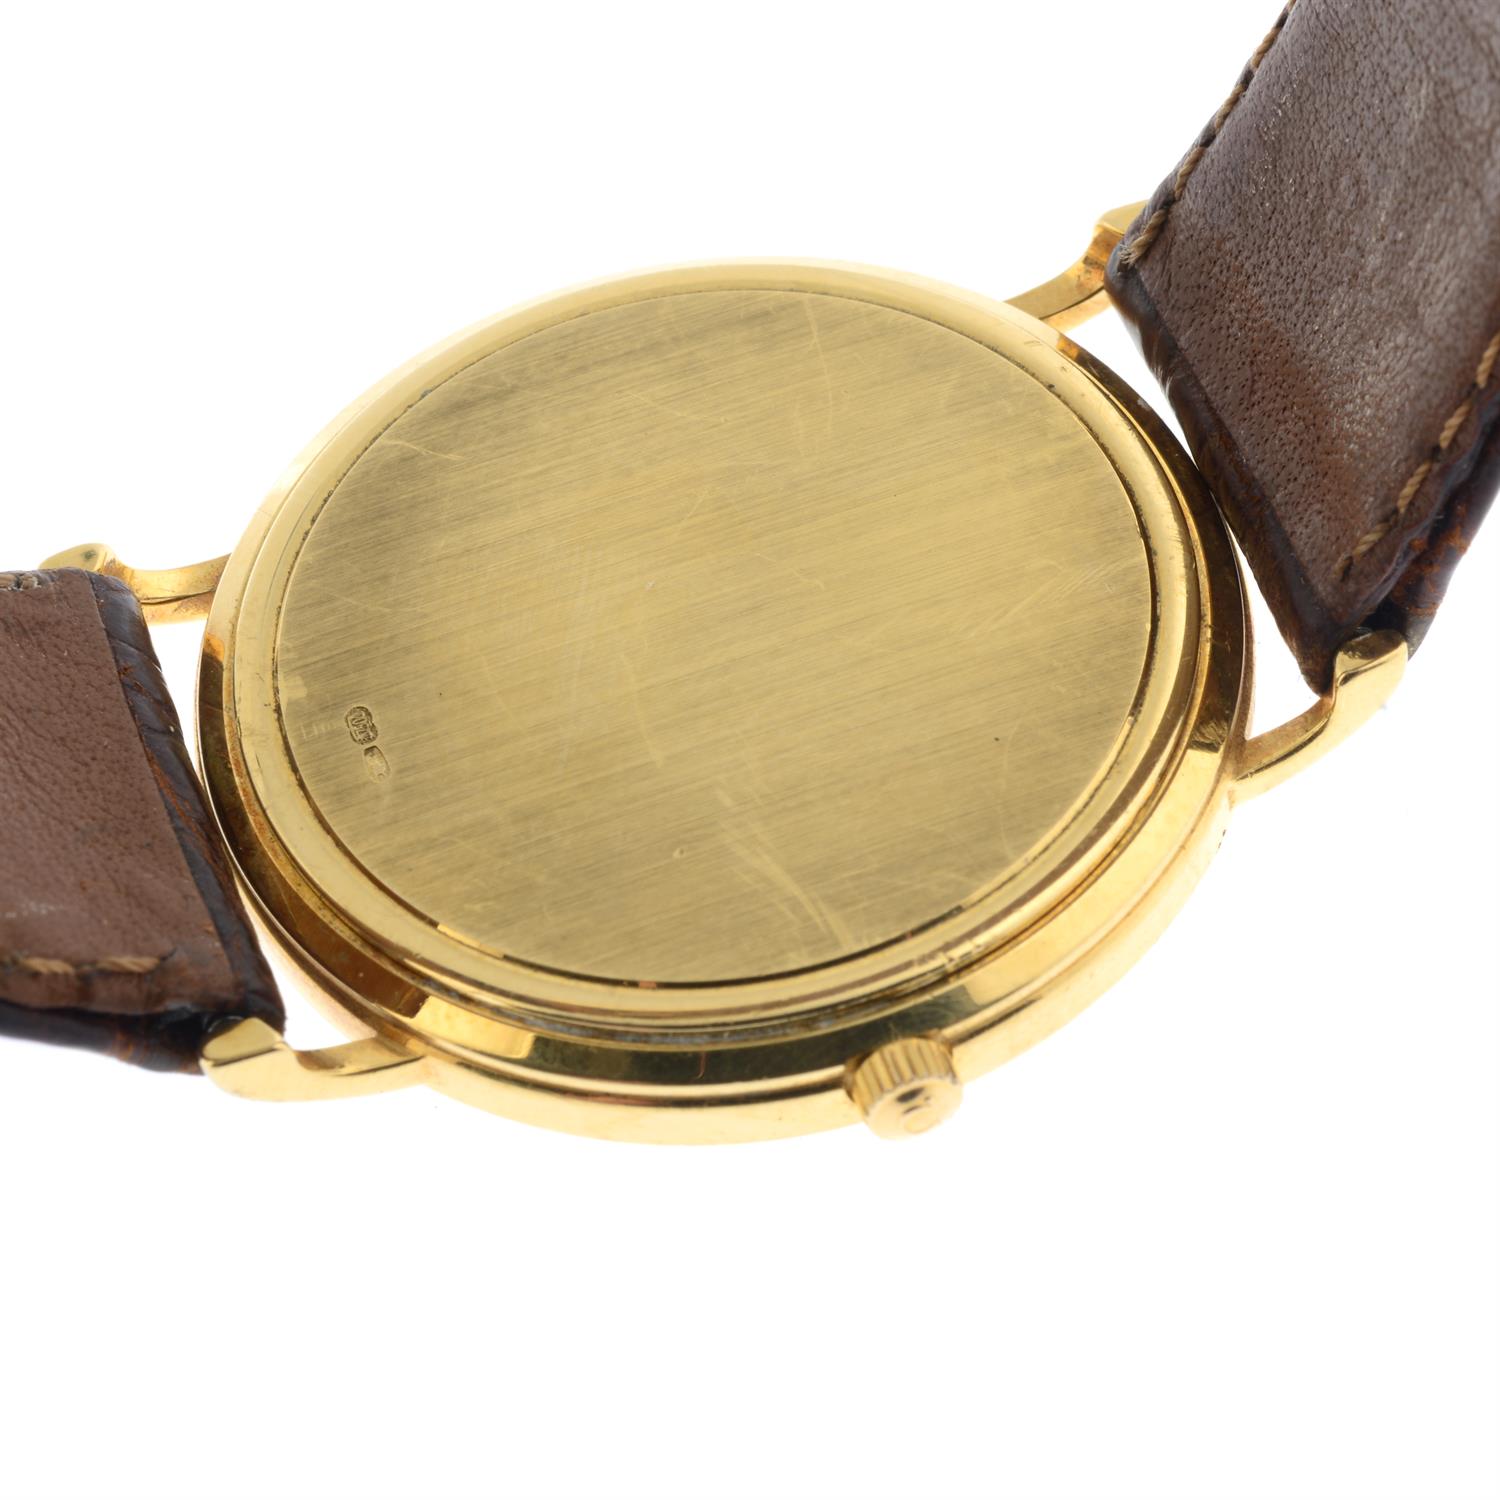 OMEGA - a yellow metal wrist watch, 32mm. - Image 2 of 6